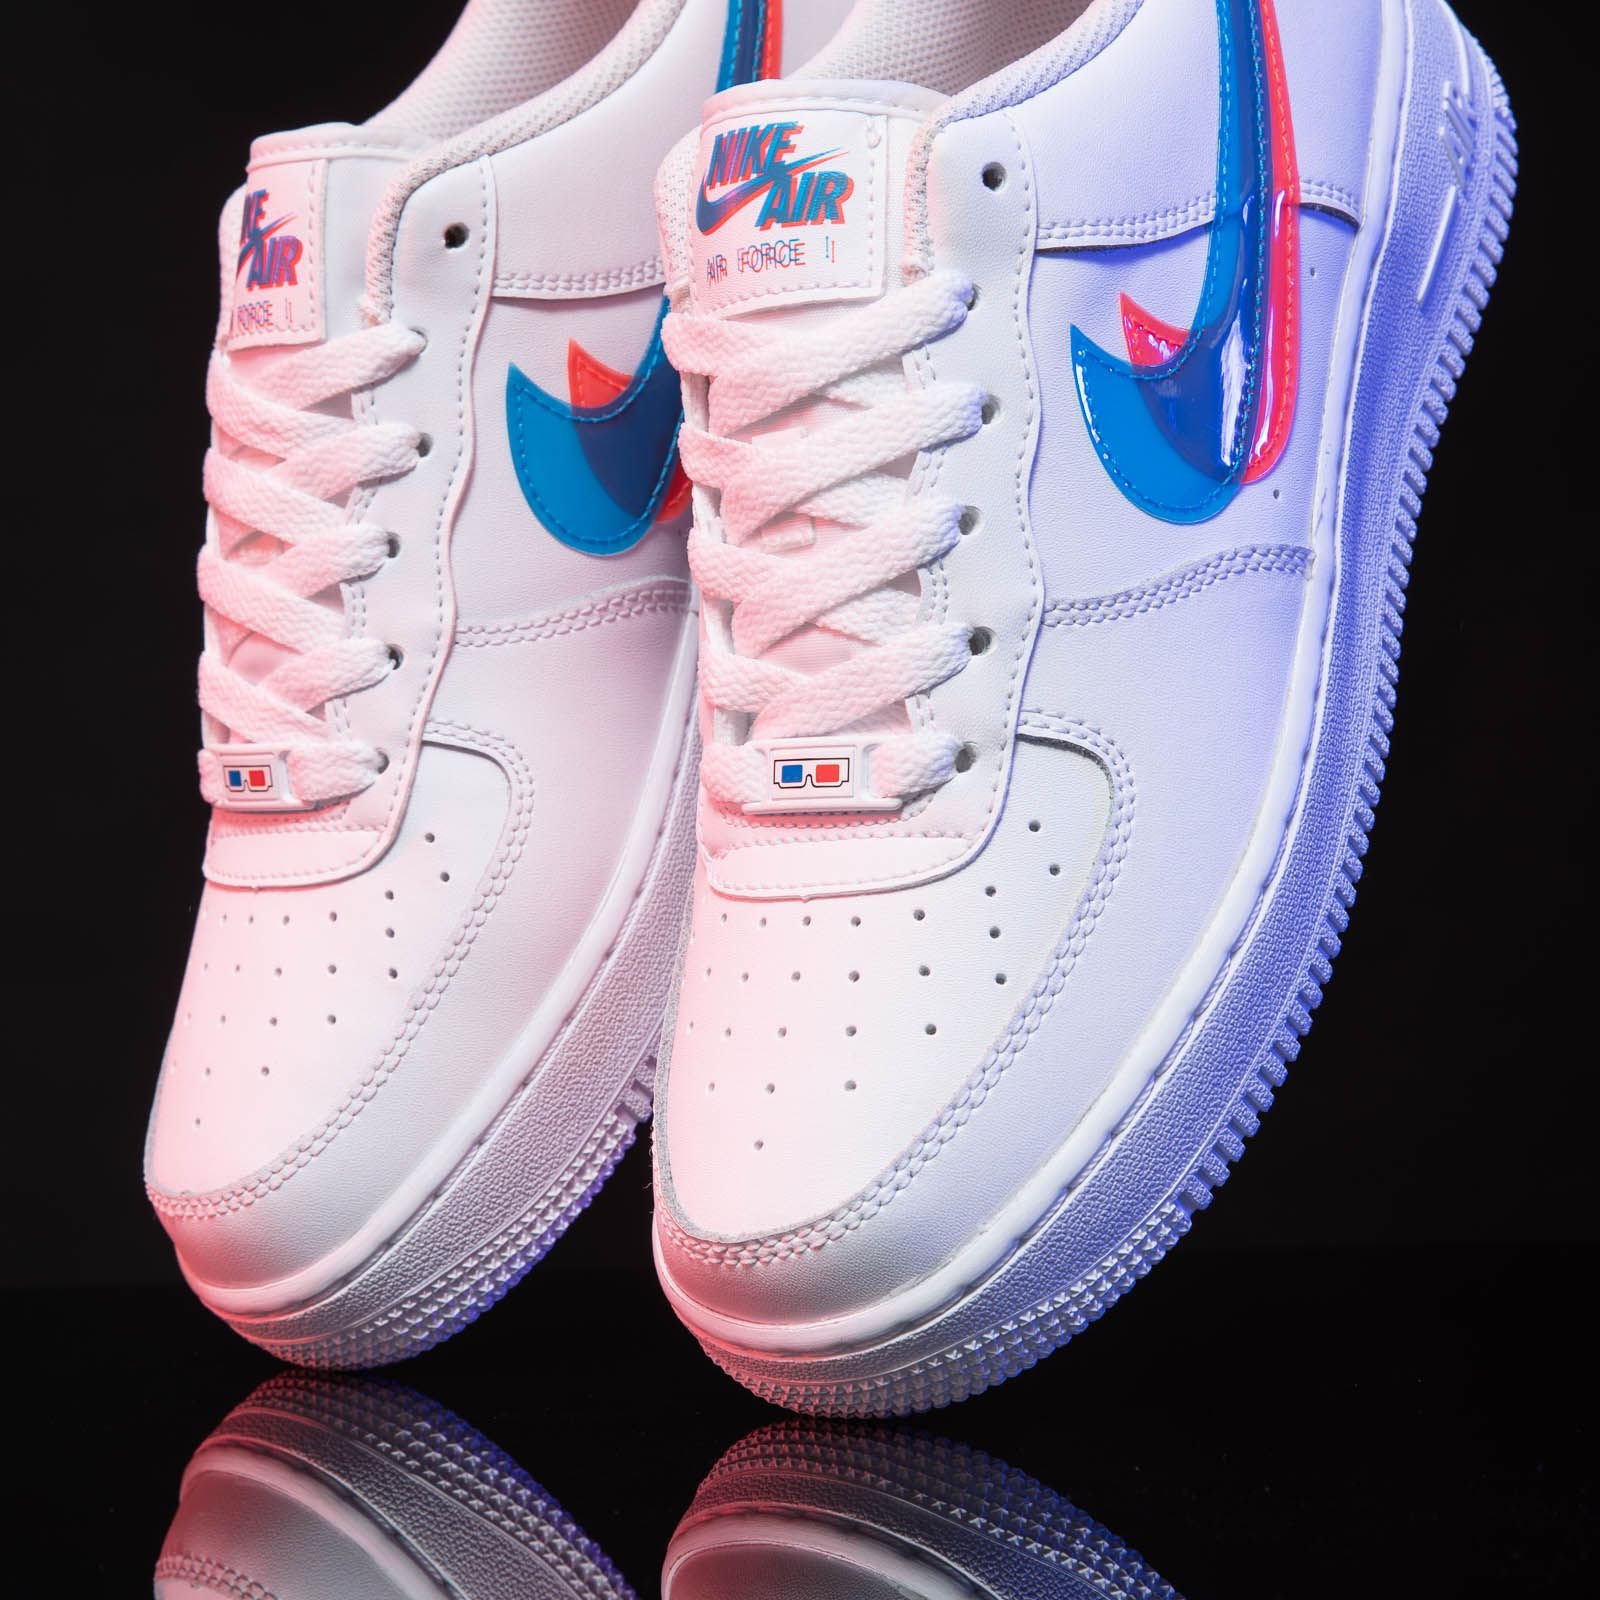 Titolo Twitter: "this grade school-sized Nike Air Force 1 requires 3D Glasses Check It Out ➡️ https://t.co/Hc67MYIsYl #nike #nikeairforce1 #af1 # 3d #airforce1 https://t.co/GGDWzfl3mN" / Twitter